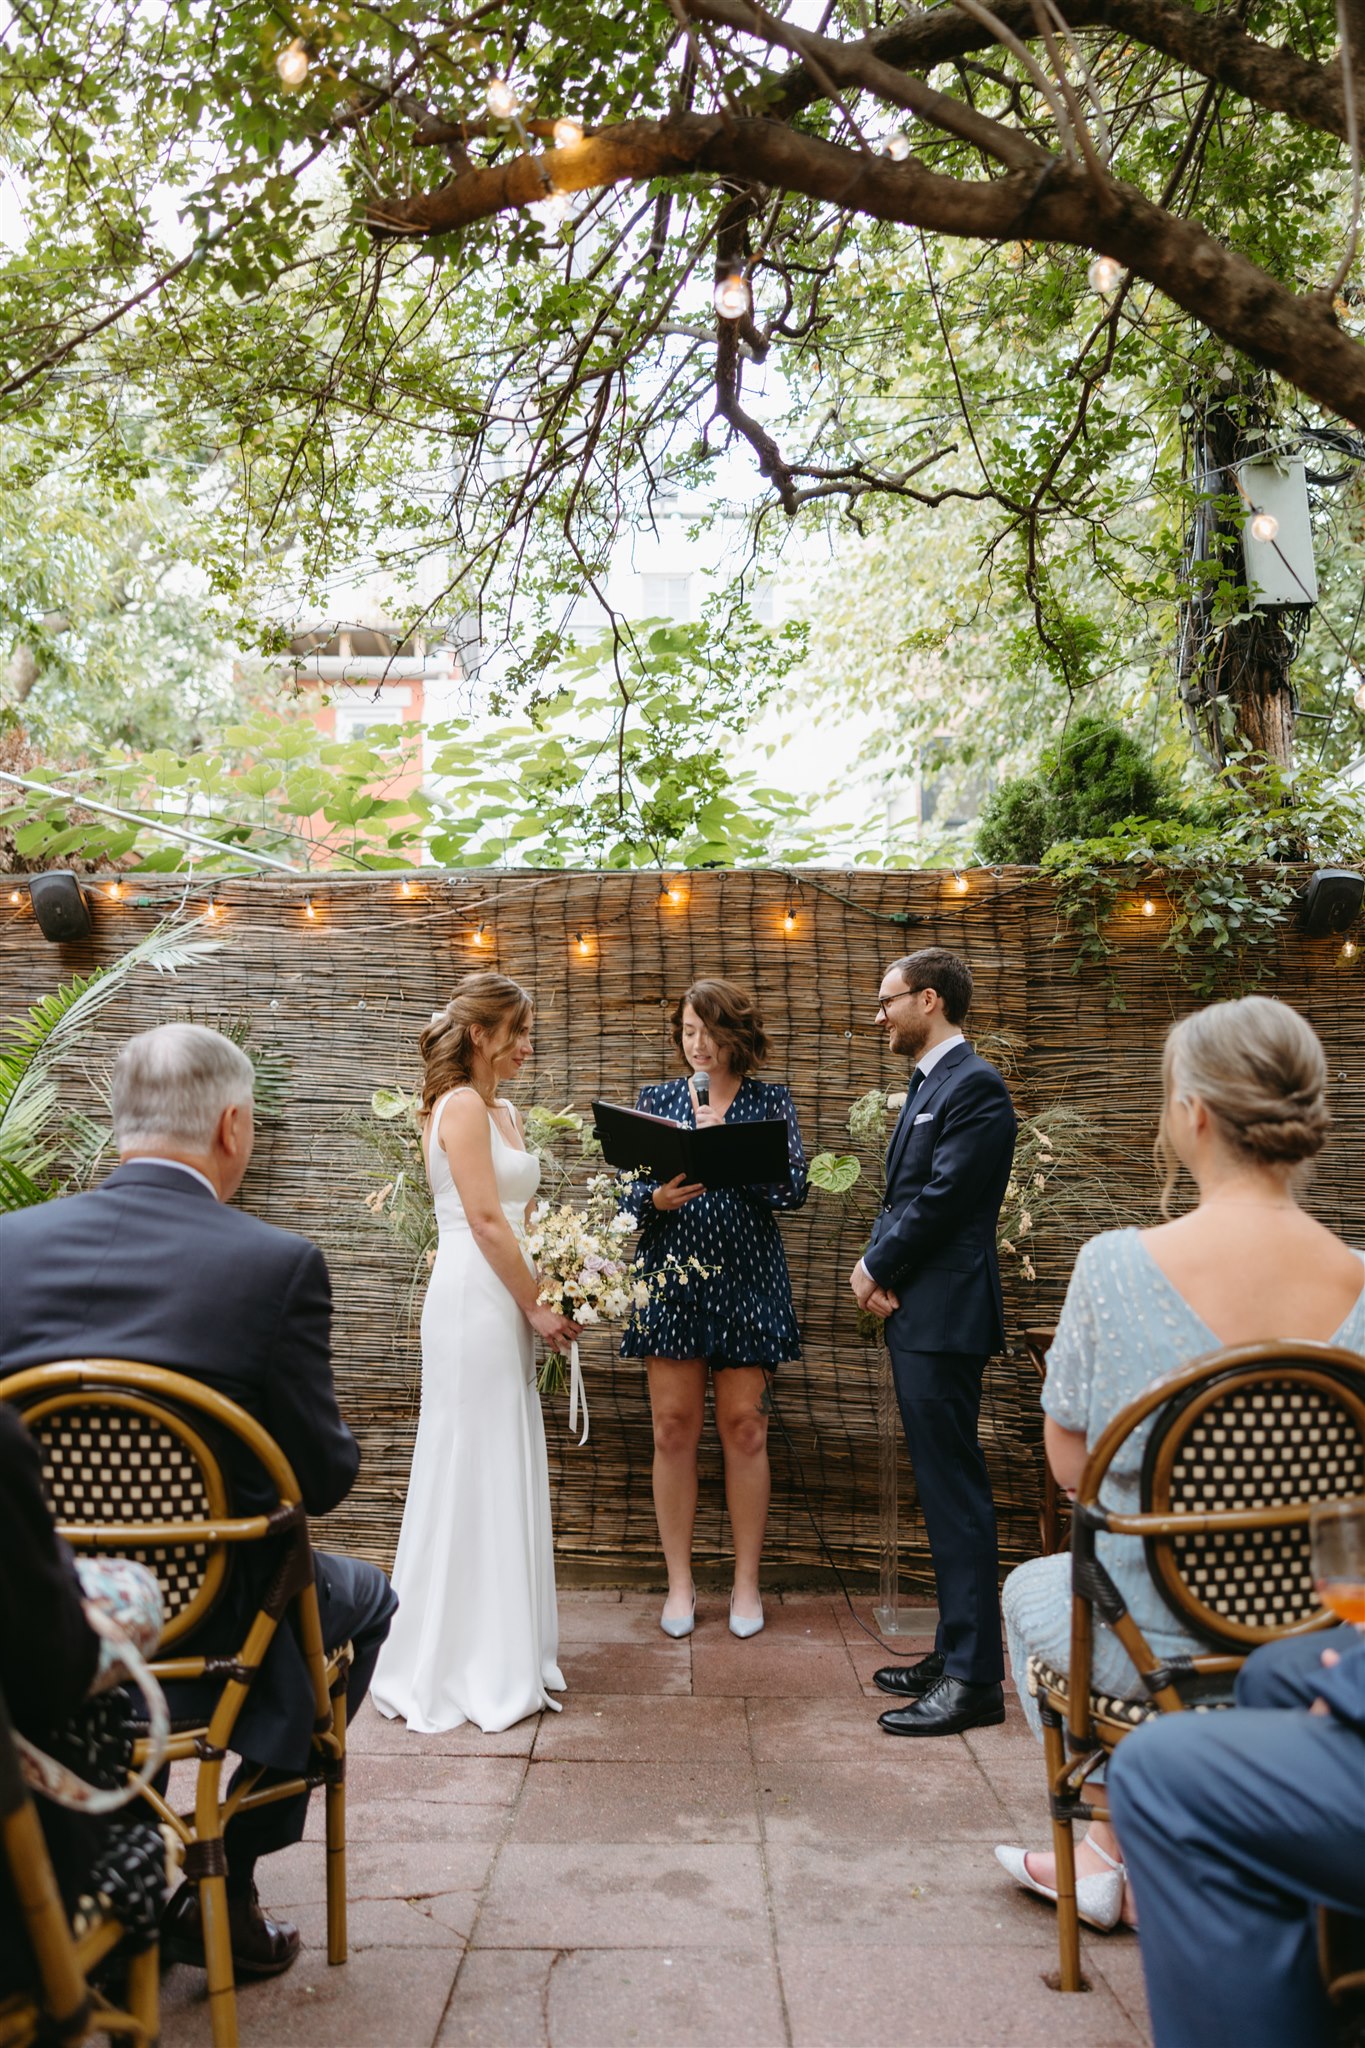 A bride and groom smiling during a wedding ceremony led by an officiant holding a black book, against a backdrop of string lights and a wicker screen at their restaurant wedding